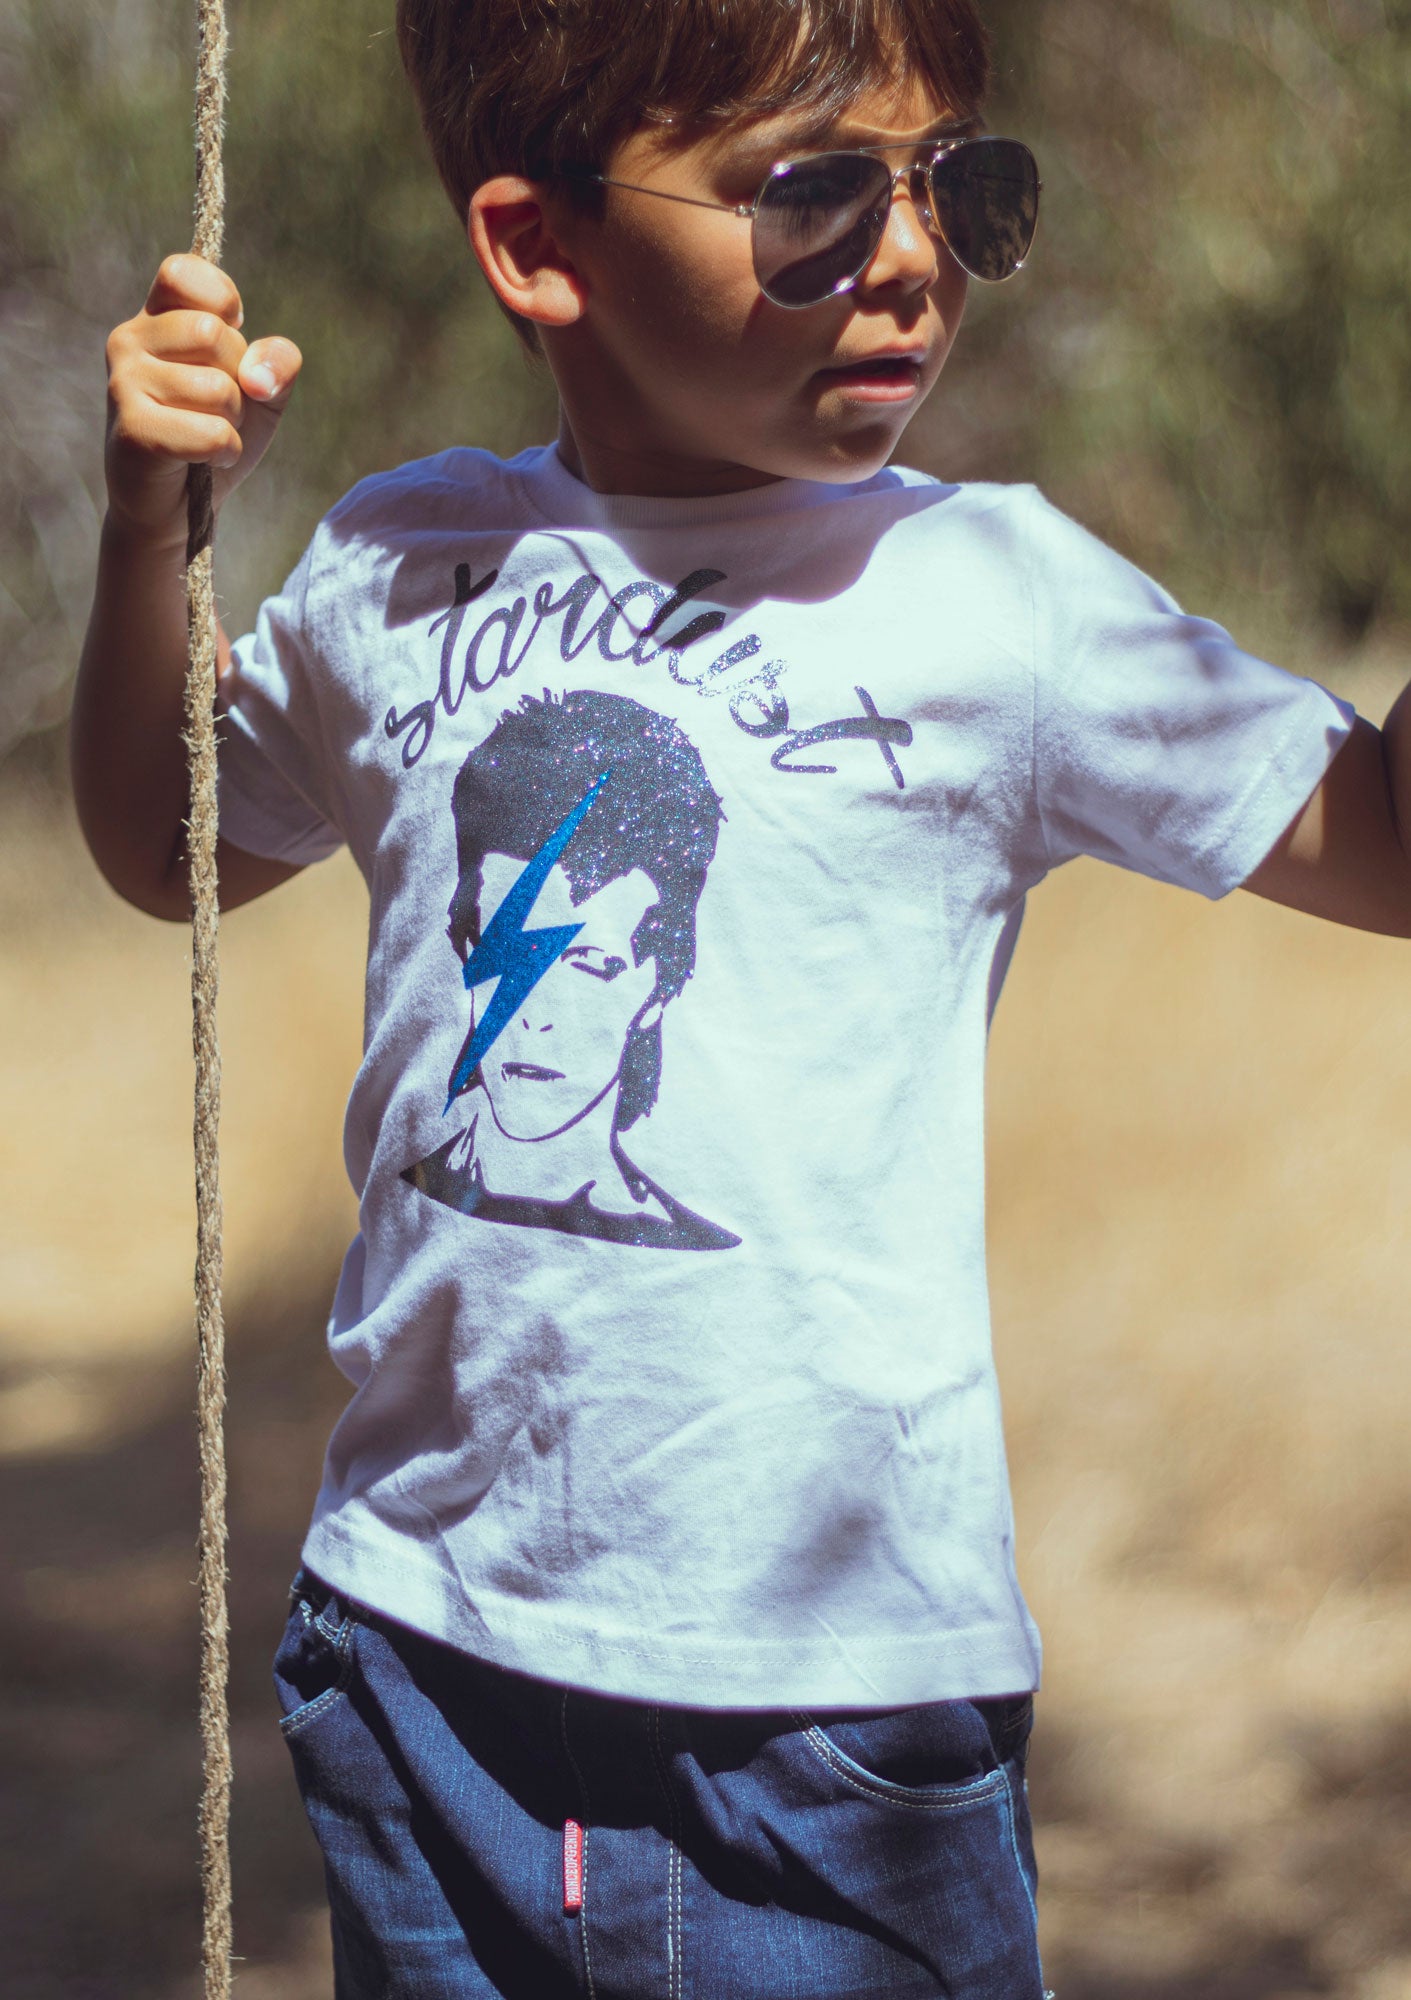 Baby Teith Bowie “Stardust” Tee